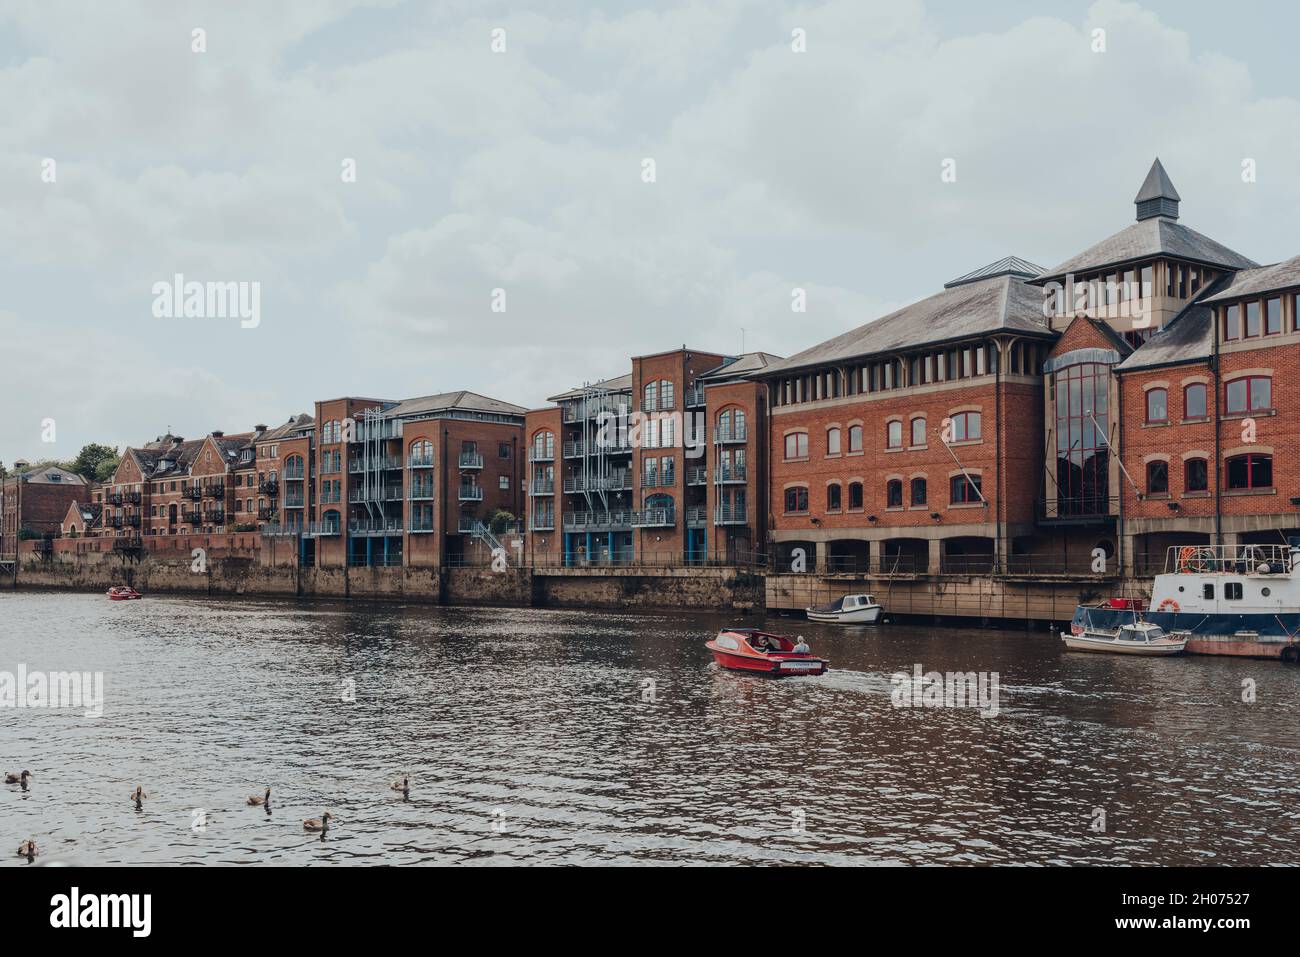 York, UK - June 22, 2021: Self-drive red hire boat on a River Ouse in York. Hire boats are a popular activity to explore the city founded by the ancie Stock Photo